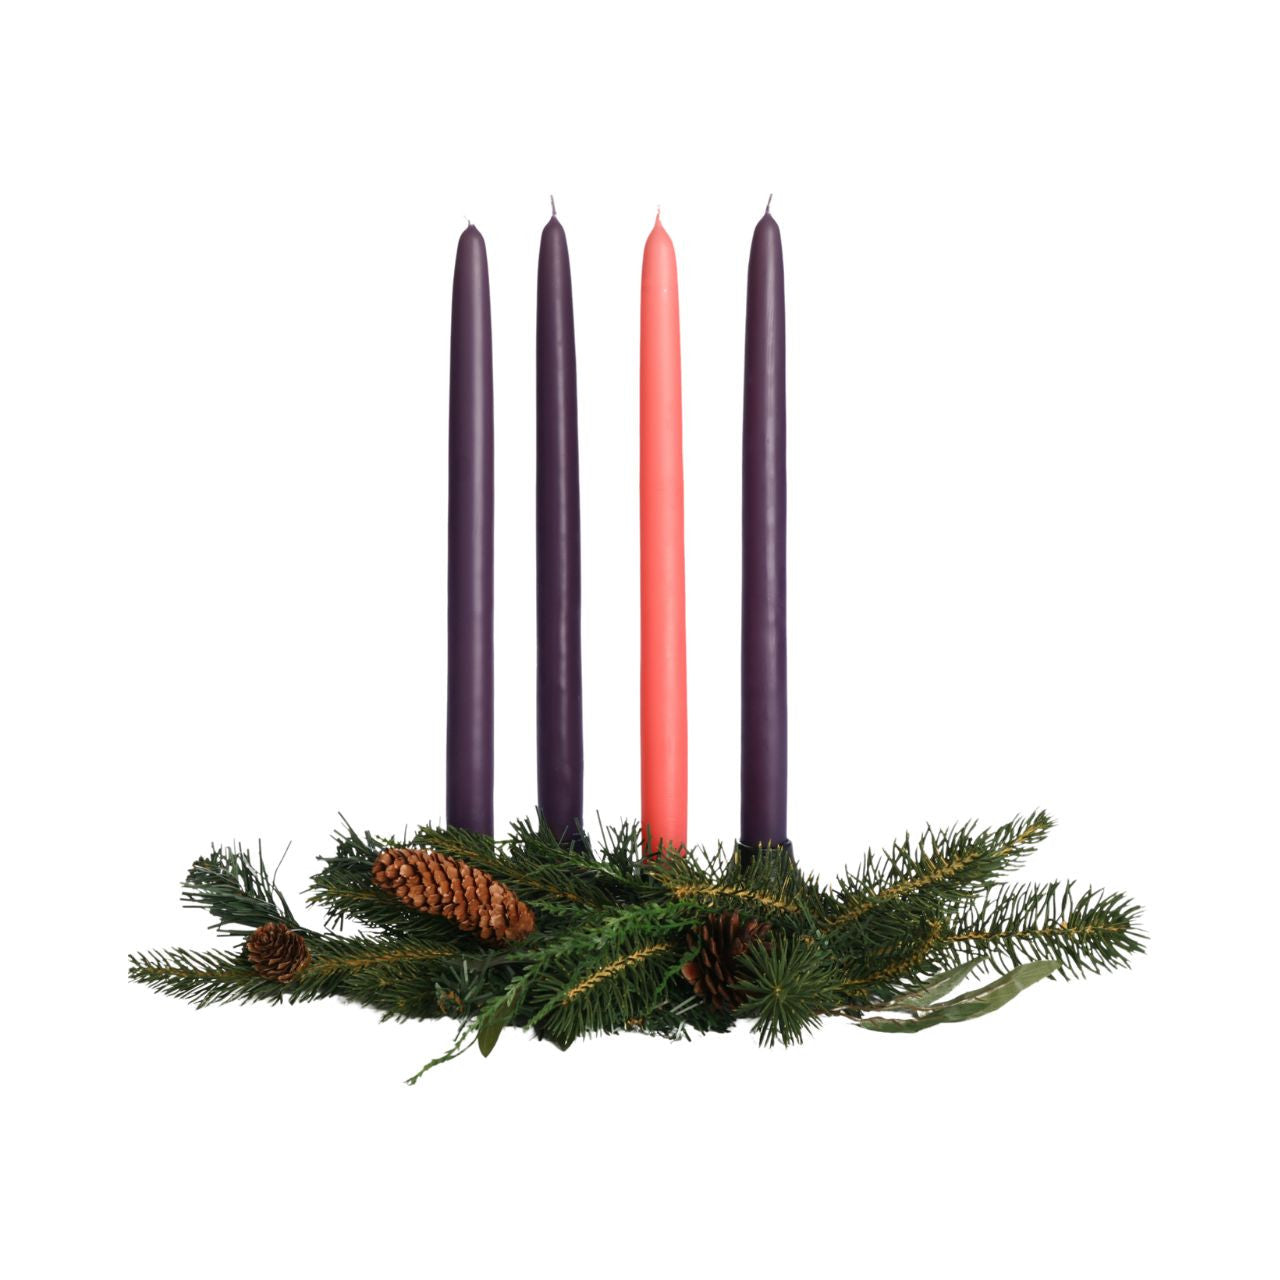 Advent Candles - 100% Beeswax; Hand Dipped